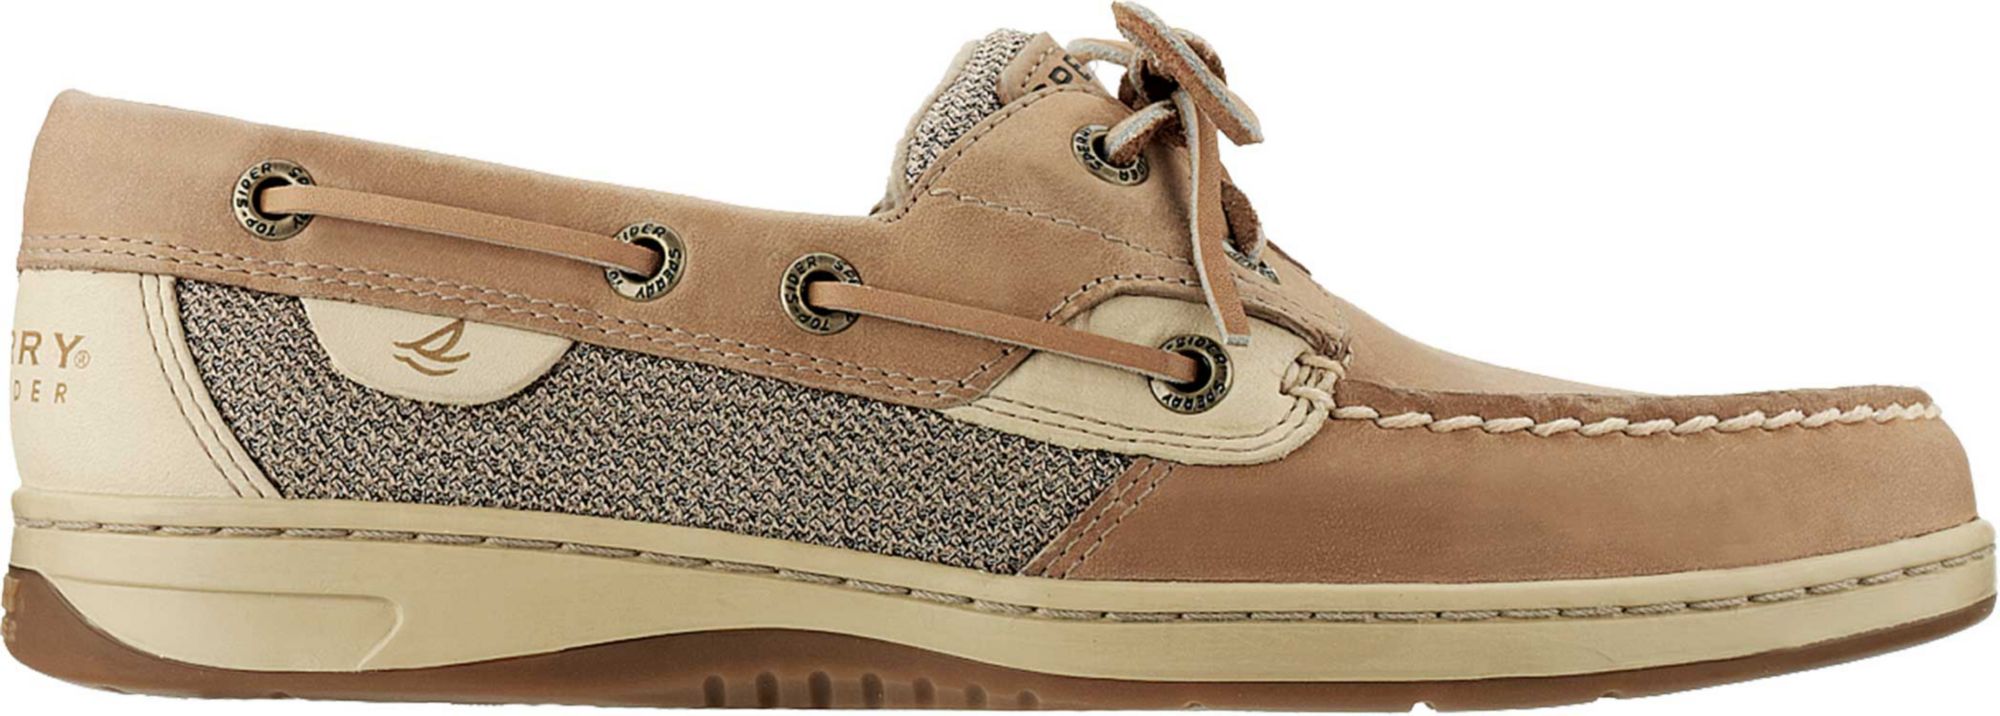 women's top sider boat shoes